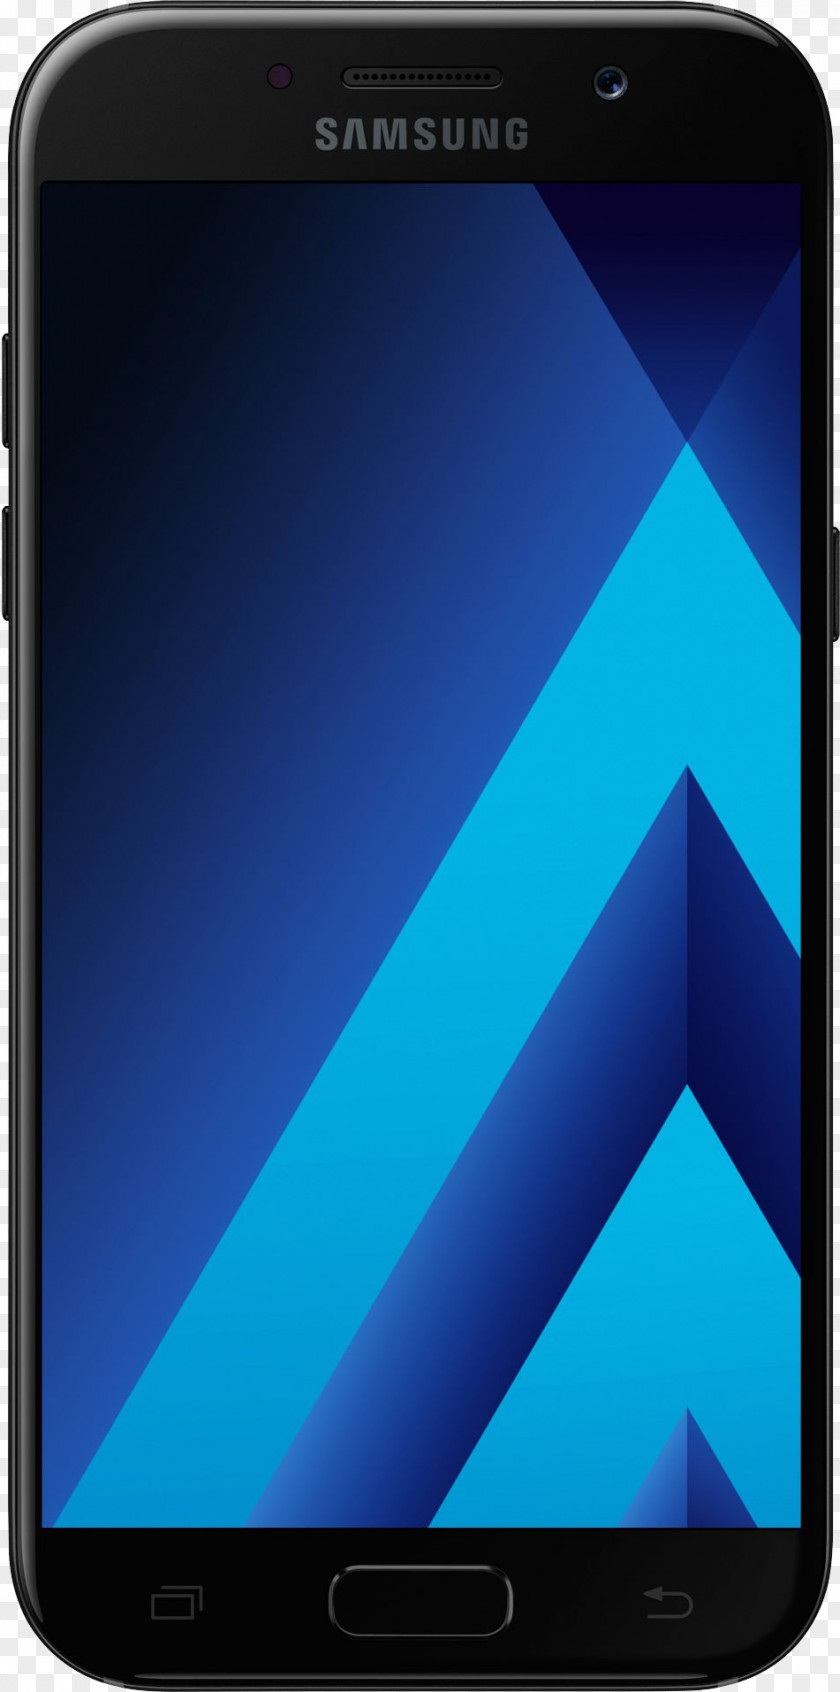 Android Samsung Galaxy A5 (2017) (2016) Pixel Density Exynos PNG